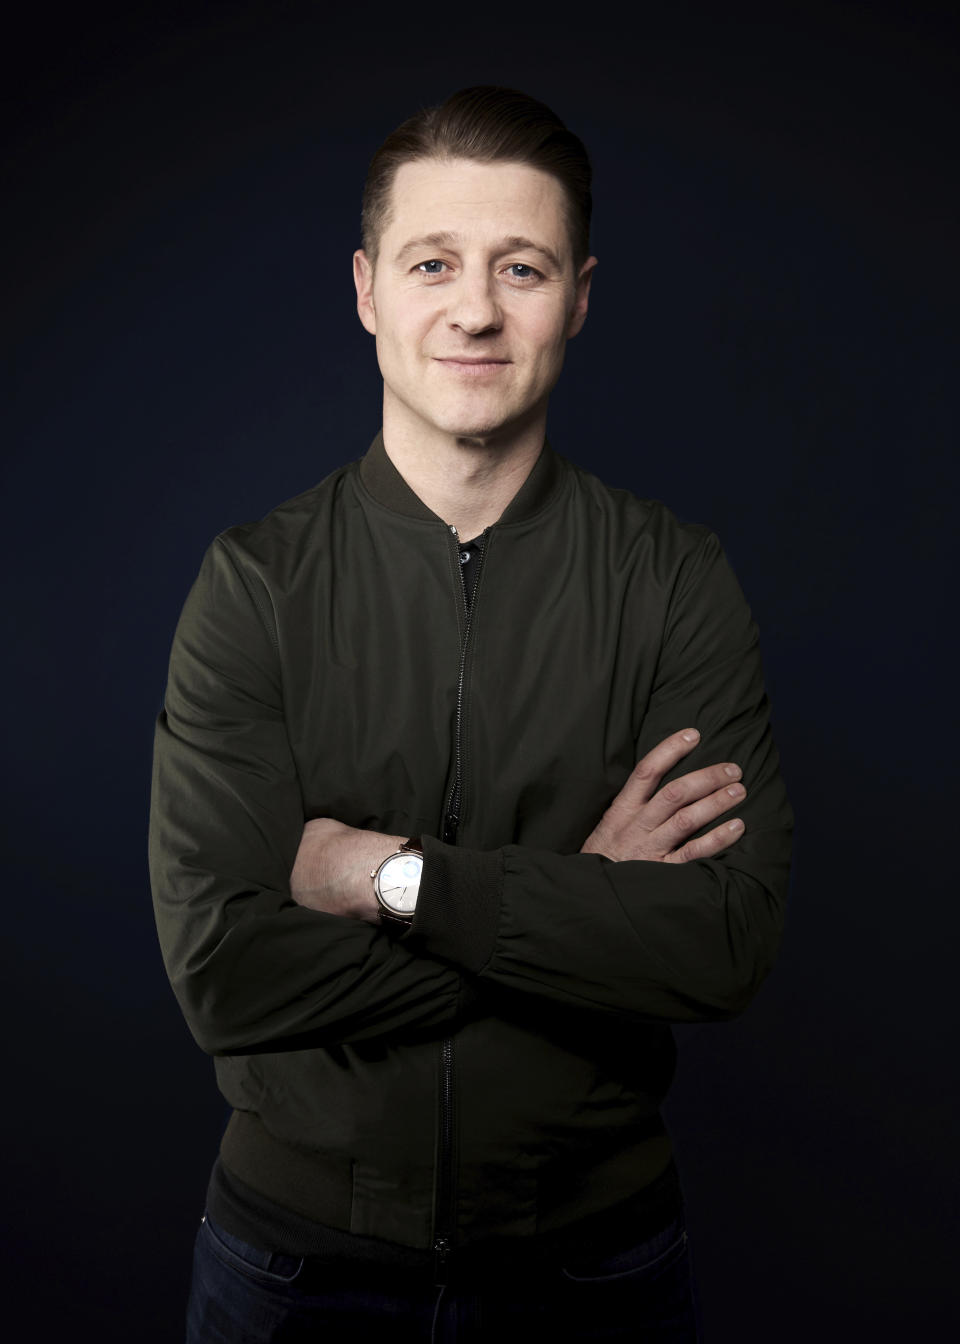 FILE - In this March 26, 2018 file photo, actor Ben McKenzie poses for a portrait in New York to promote his Fox series, "Gotham." During the five years he’s starred as Gotham City police detective and future commissioner James Gordon in the Batman prequel, McKenzie also wrote two episodes and directed three others. (Photo by Taylor Jewell/Invision/AP)